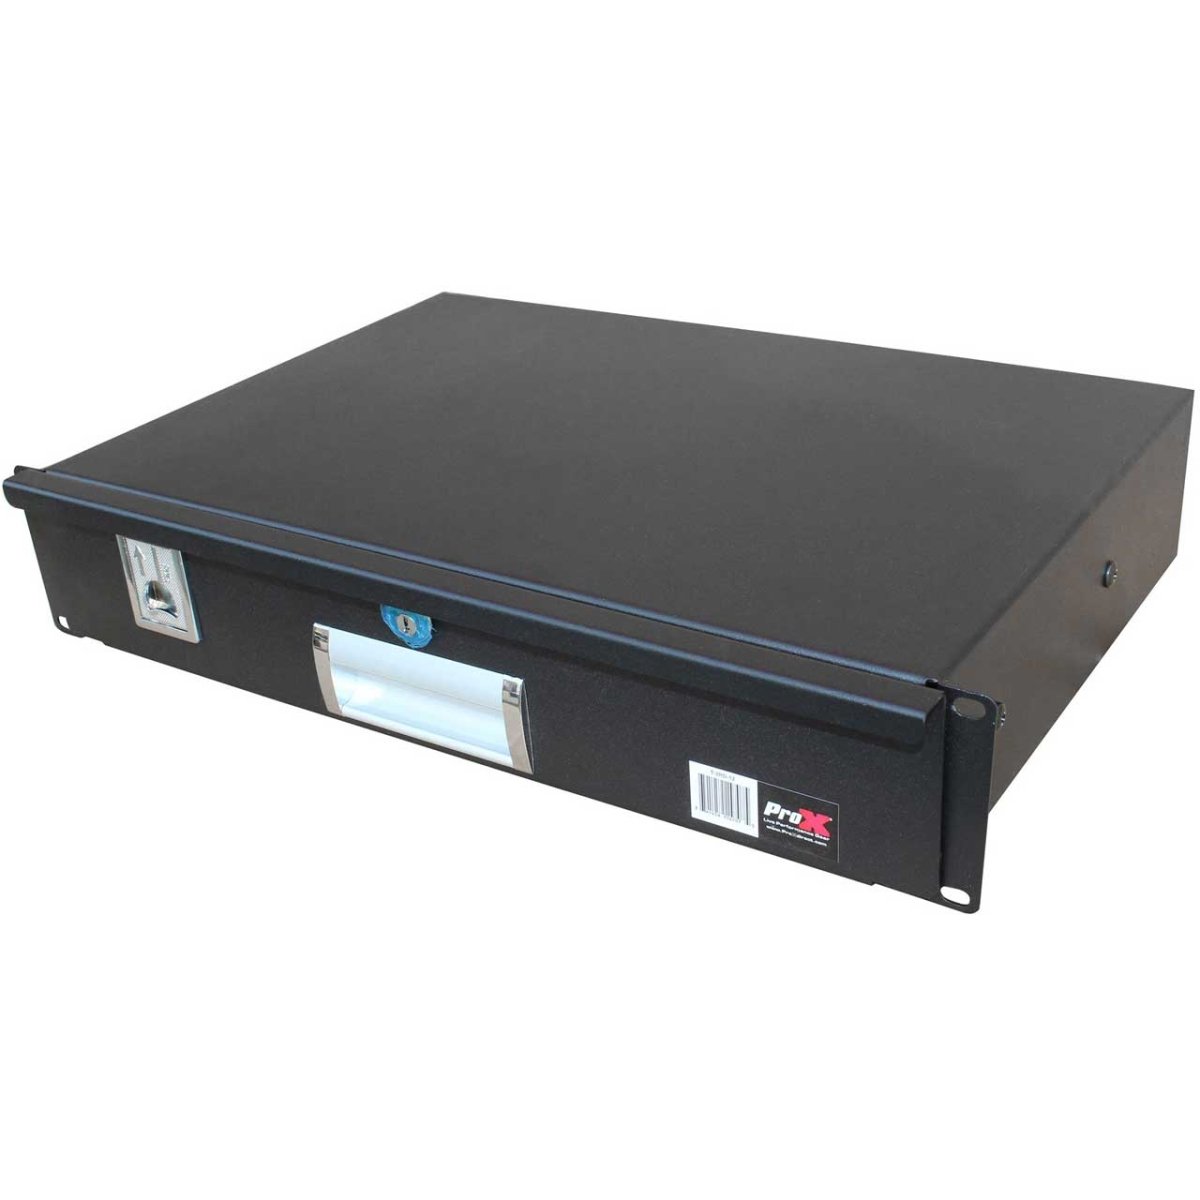 Picture of ProX Live Performance Gear PXP-T-2RD-12 12 in. 2RU Depth Rack Mount Drawer for Audio - DJ & IT Server Rack Cases